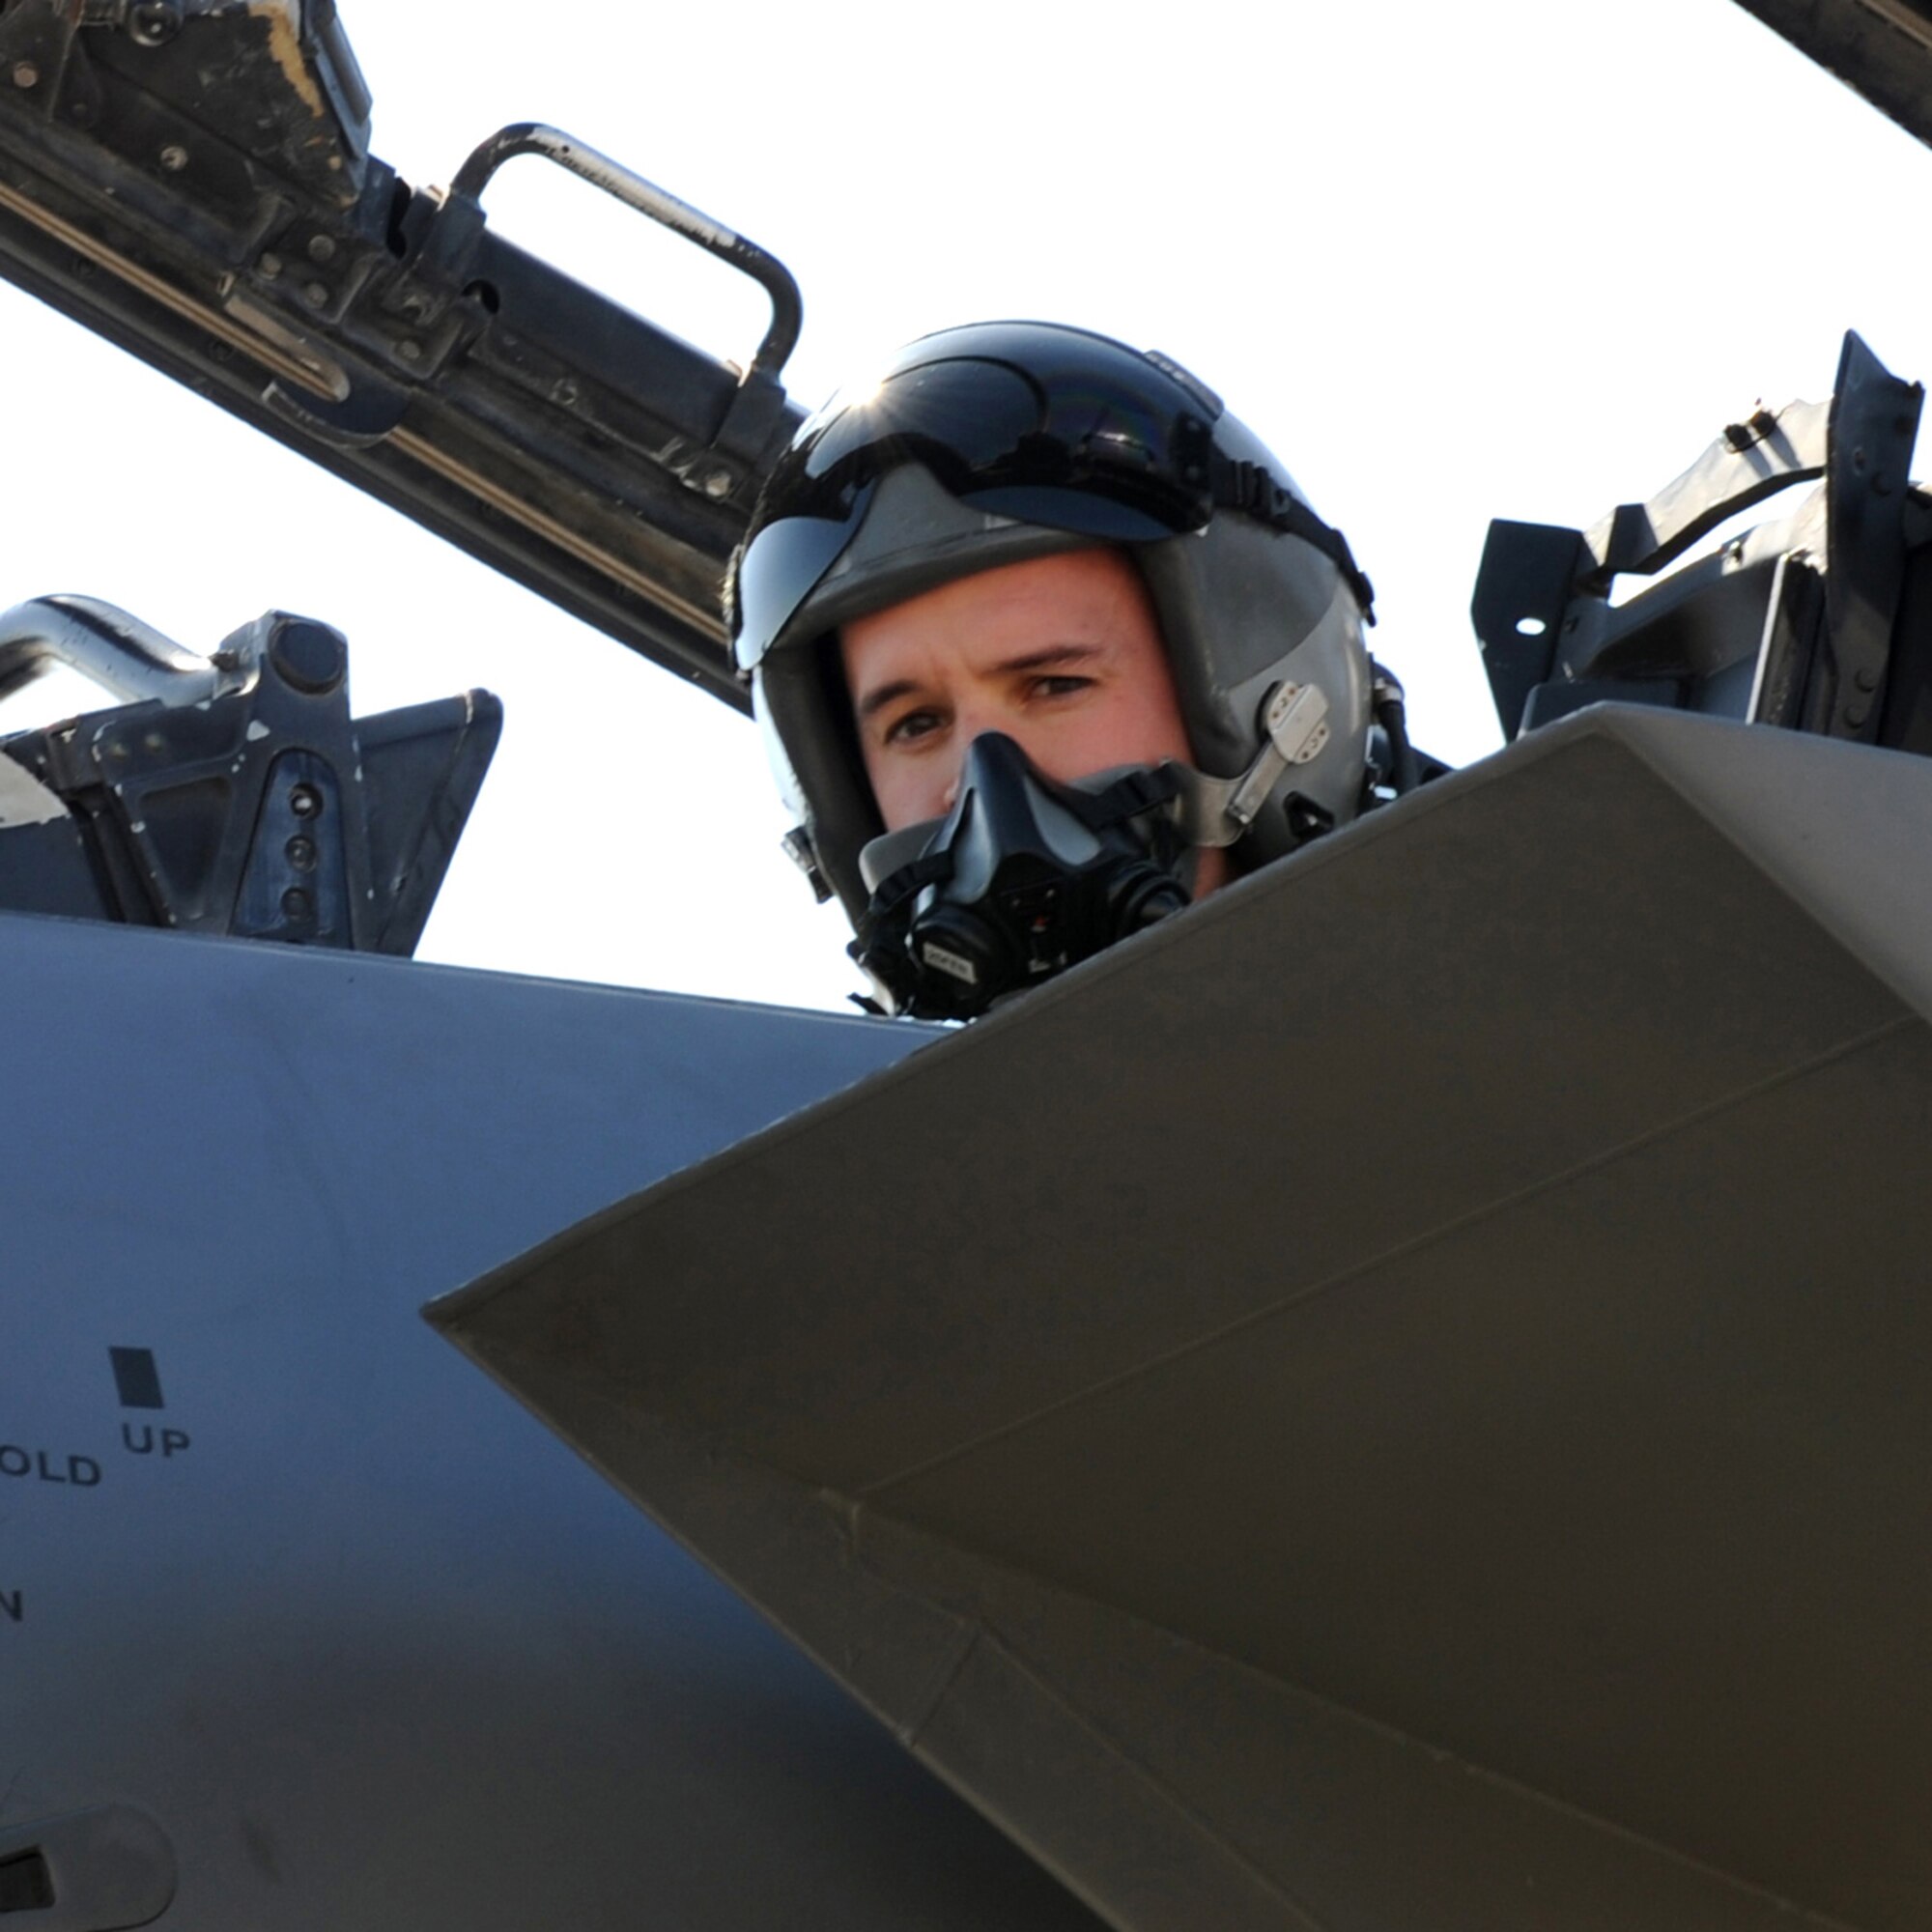 Captain Prichard Keely, 335th Fighter Squadron weapons systems officer, prepares for take off in his F-15E Strike Eagle at Seymour Johnson Air Force Base, N.C., Feb. 23, 2009. In April 2008, Captain Keely and aircrew from the 335th FS provided close-air support for ground forces during a massive fire fight in Shok Valley, Afghanistan. The 335th FS was deployed in support of Operation Enduring Freedom. (U.S. Air Force Photo by Airman 1st Class Gino Reyes)